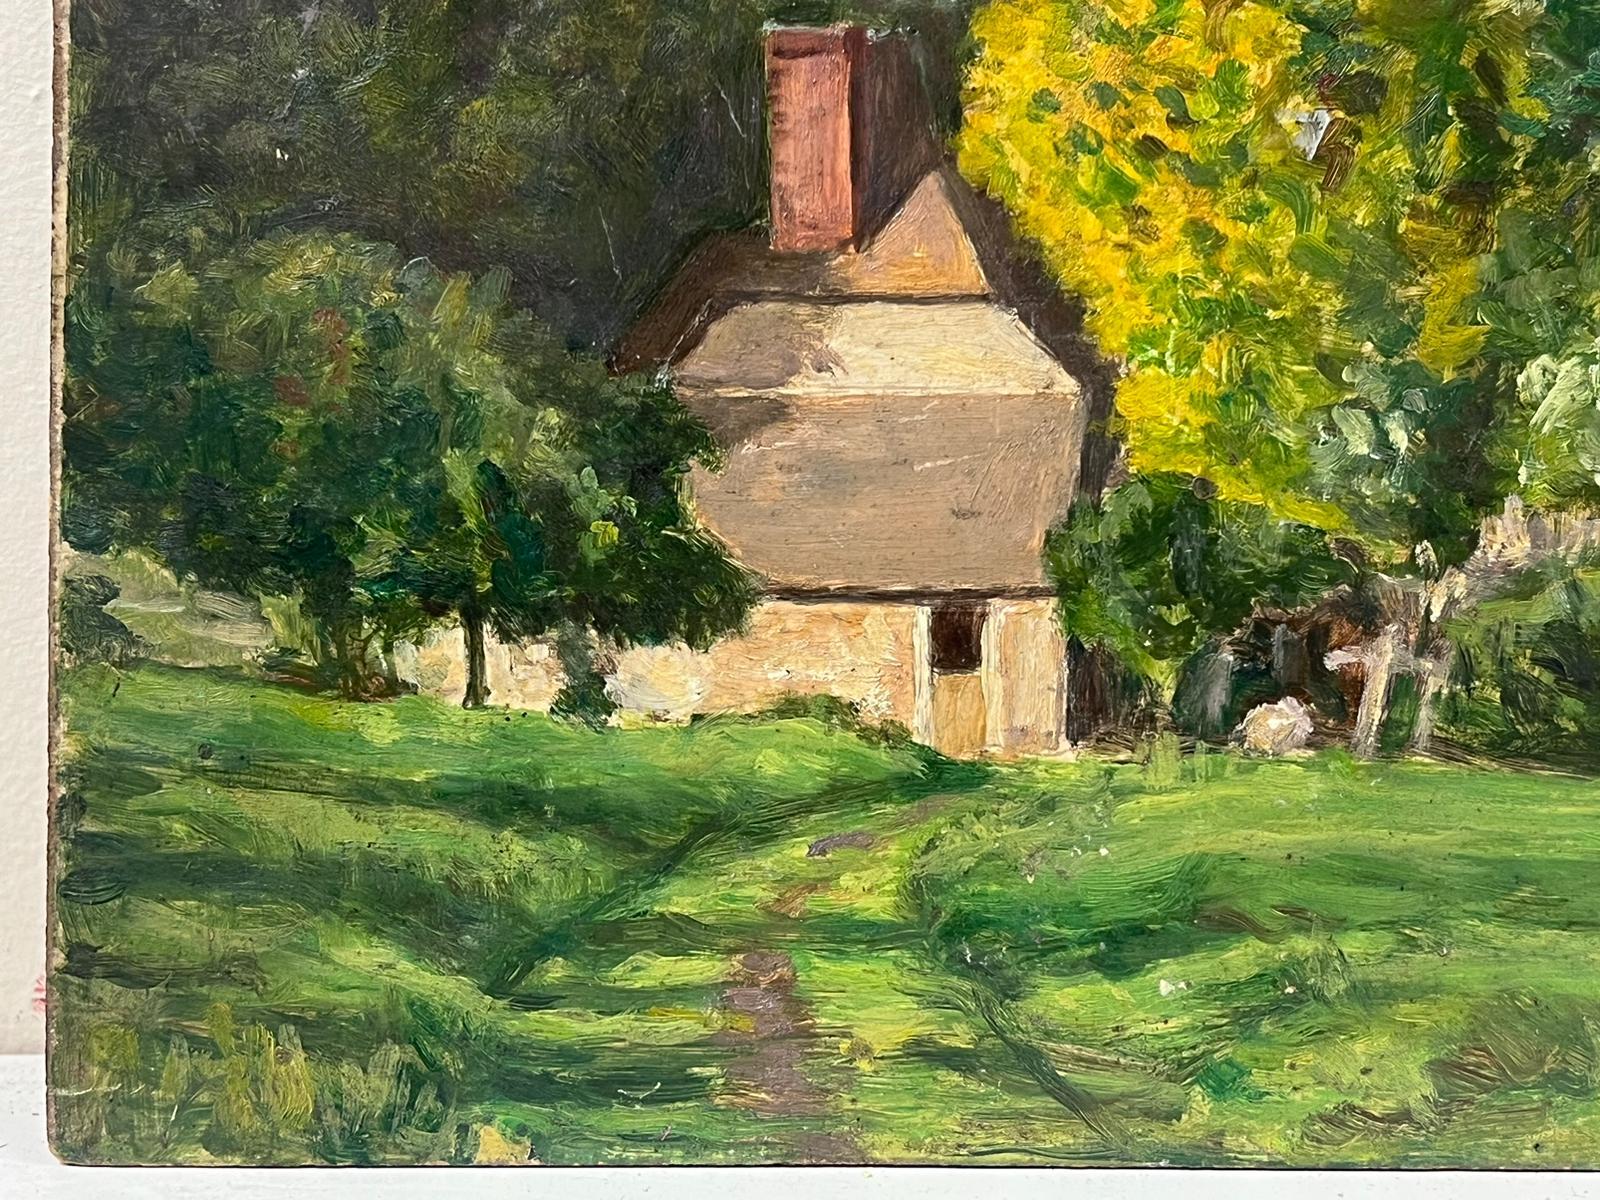 French Countryside Landscape
by Edmond Quinton (French 1892-1969) *see notes below
oil painting on board/ panel, unframed
size: 7.75 x 9.5 inches
condition: overall good and sound, some age related marks and old dirt, all four corners and edges worn